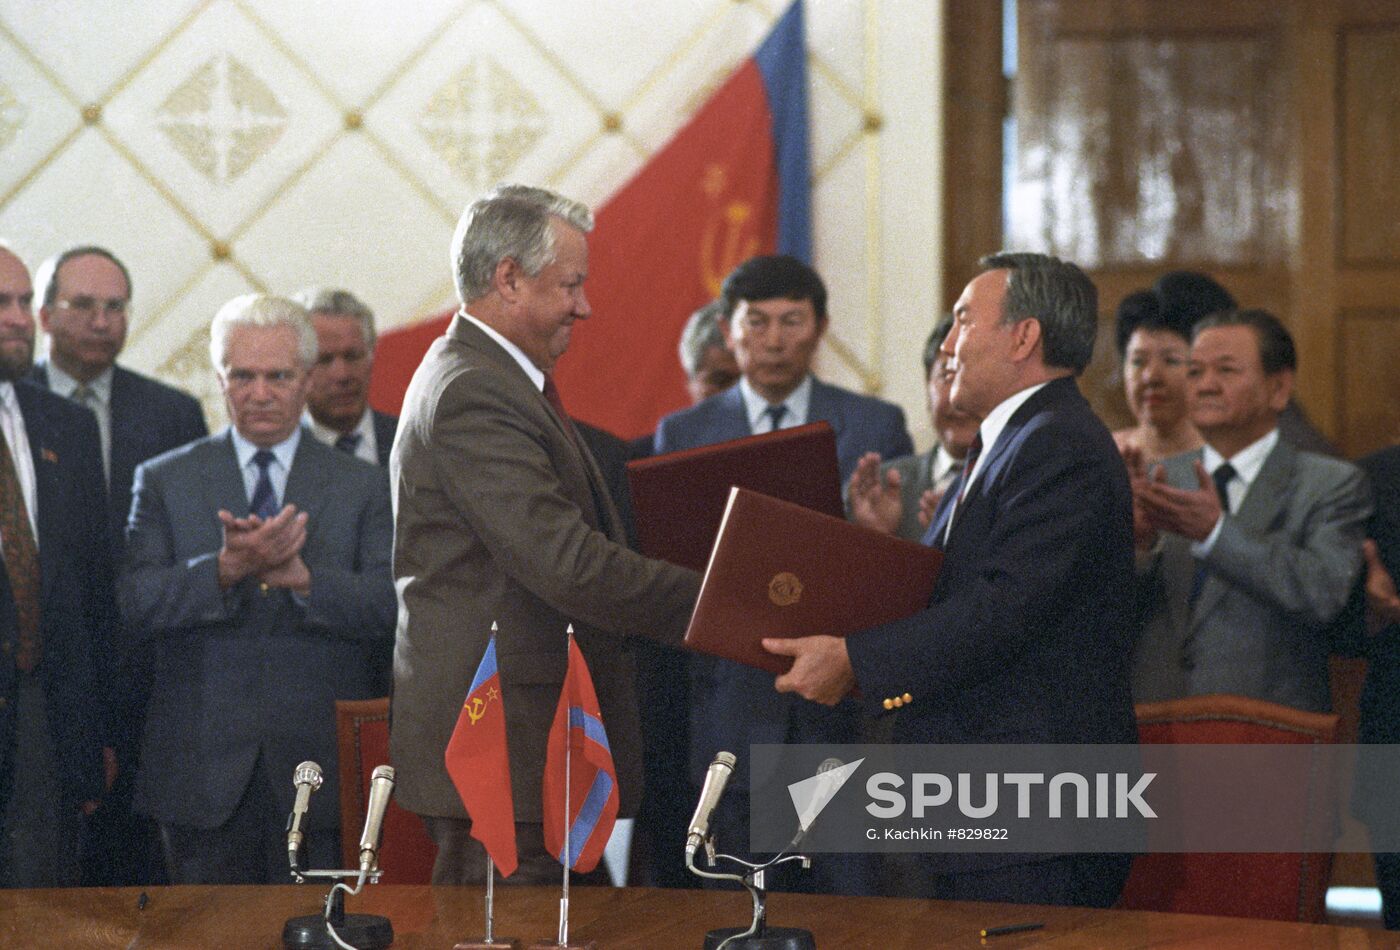 President of Russia B.Yeltsin and President of Kazakhstan N.Nazarbayev after signing bilateral documents